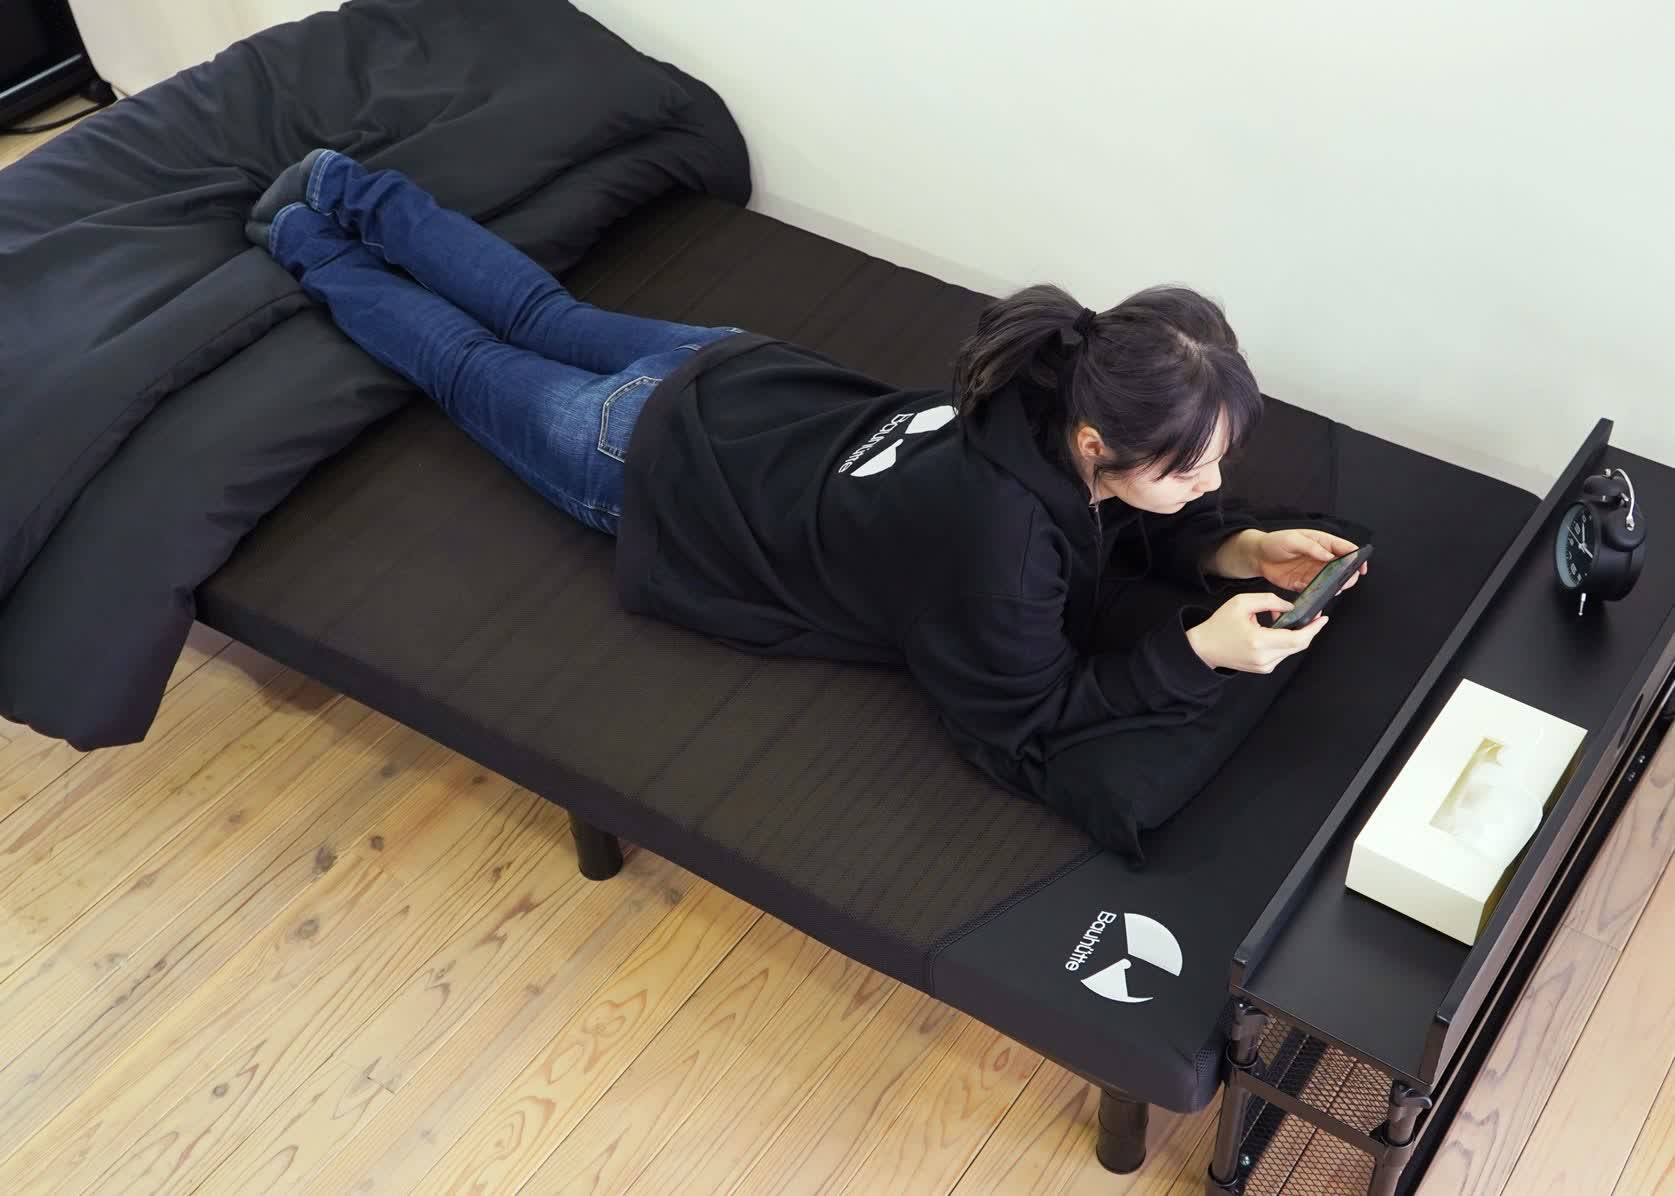 You can buy a 'Gaming Mattress' in Japan that looks suspiciously like a normal mattress